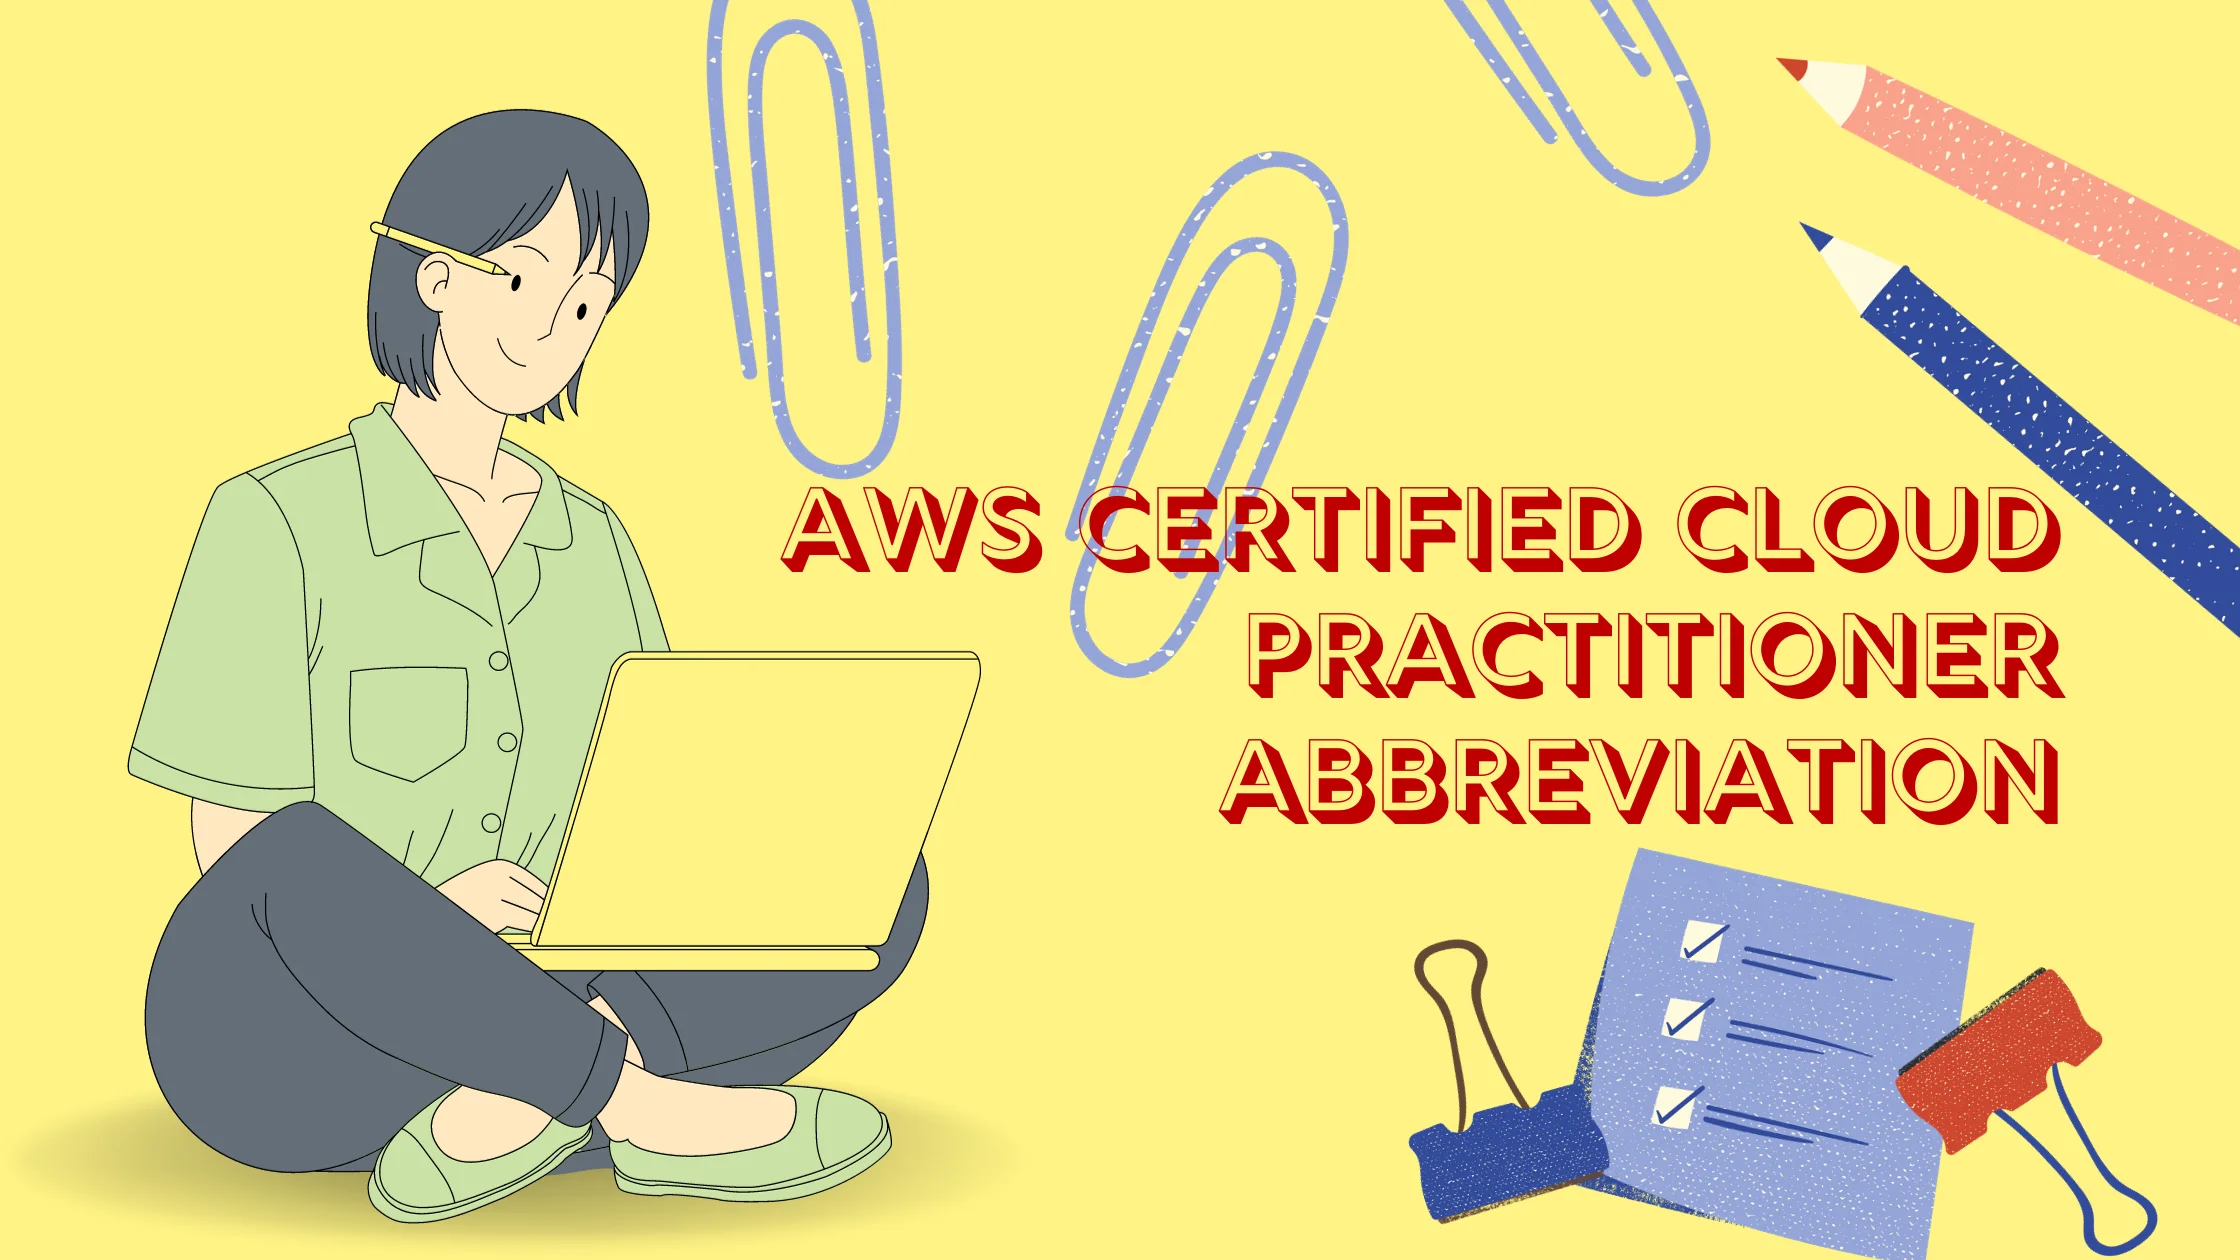 AWS Certified Cloud Practitioner Abbreviation